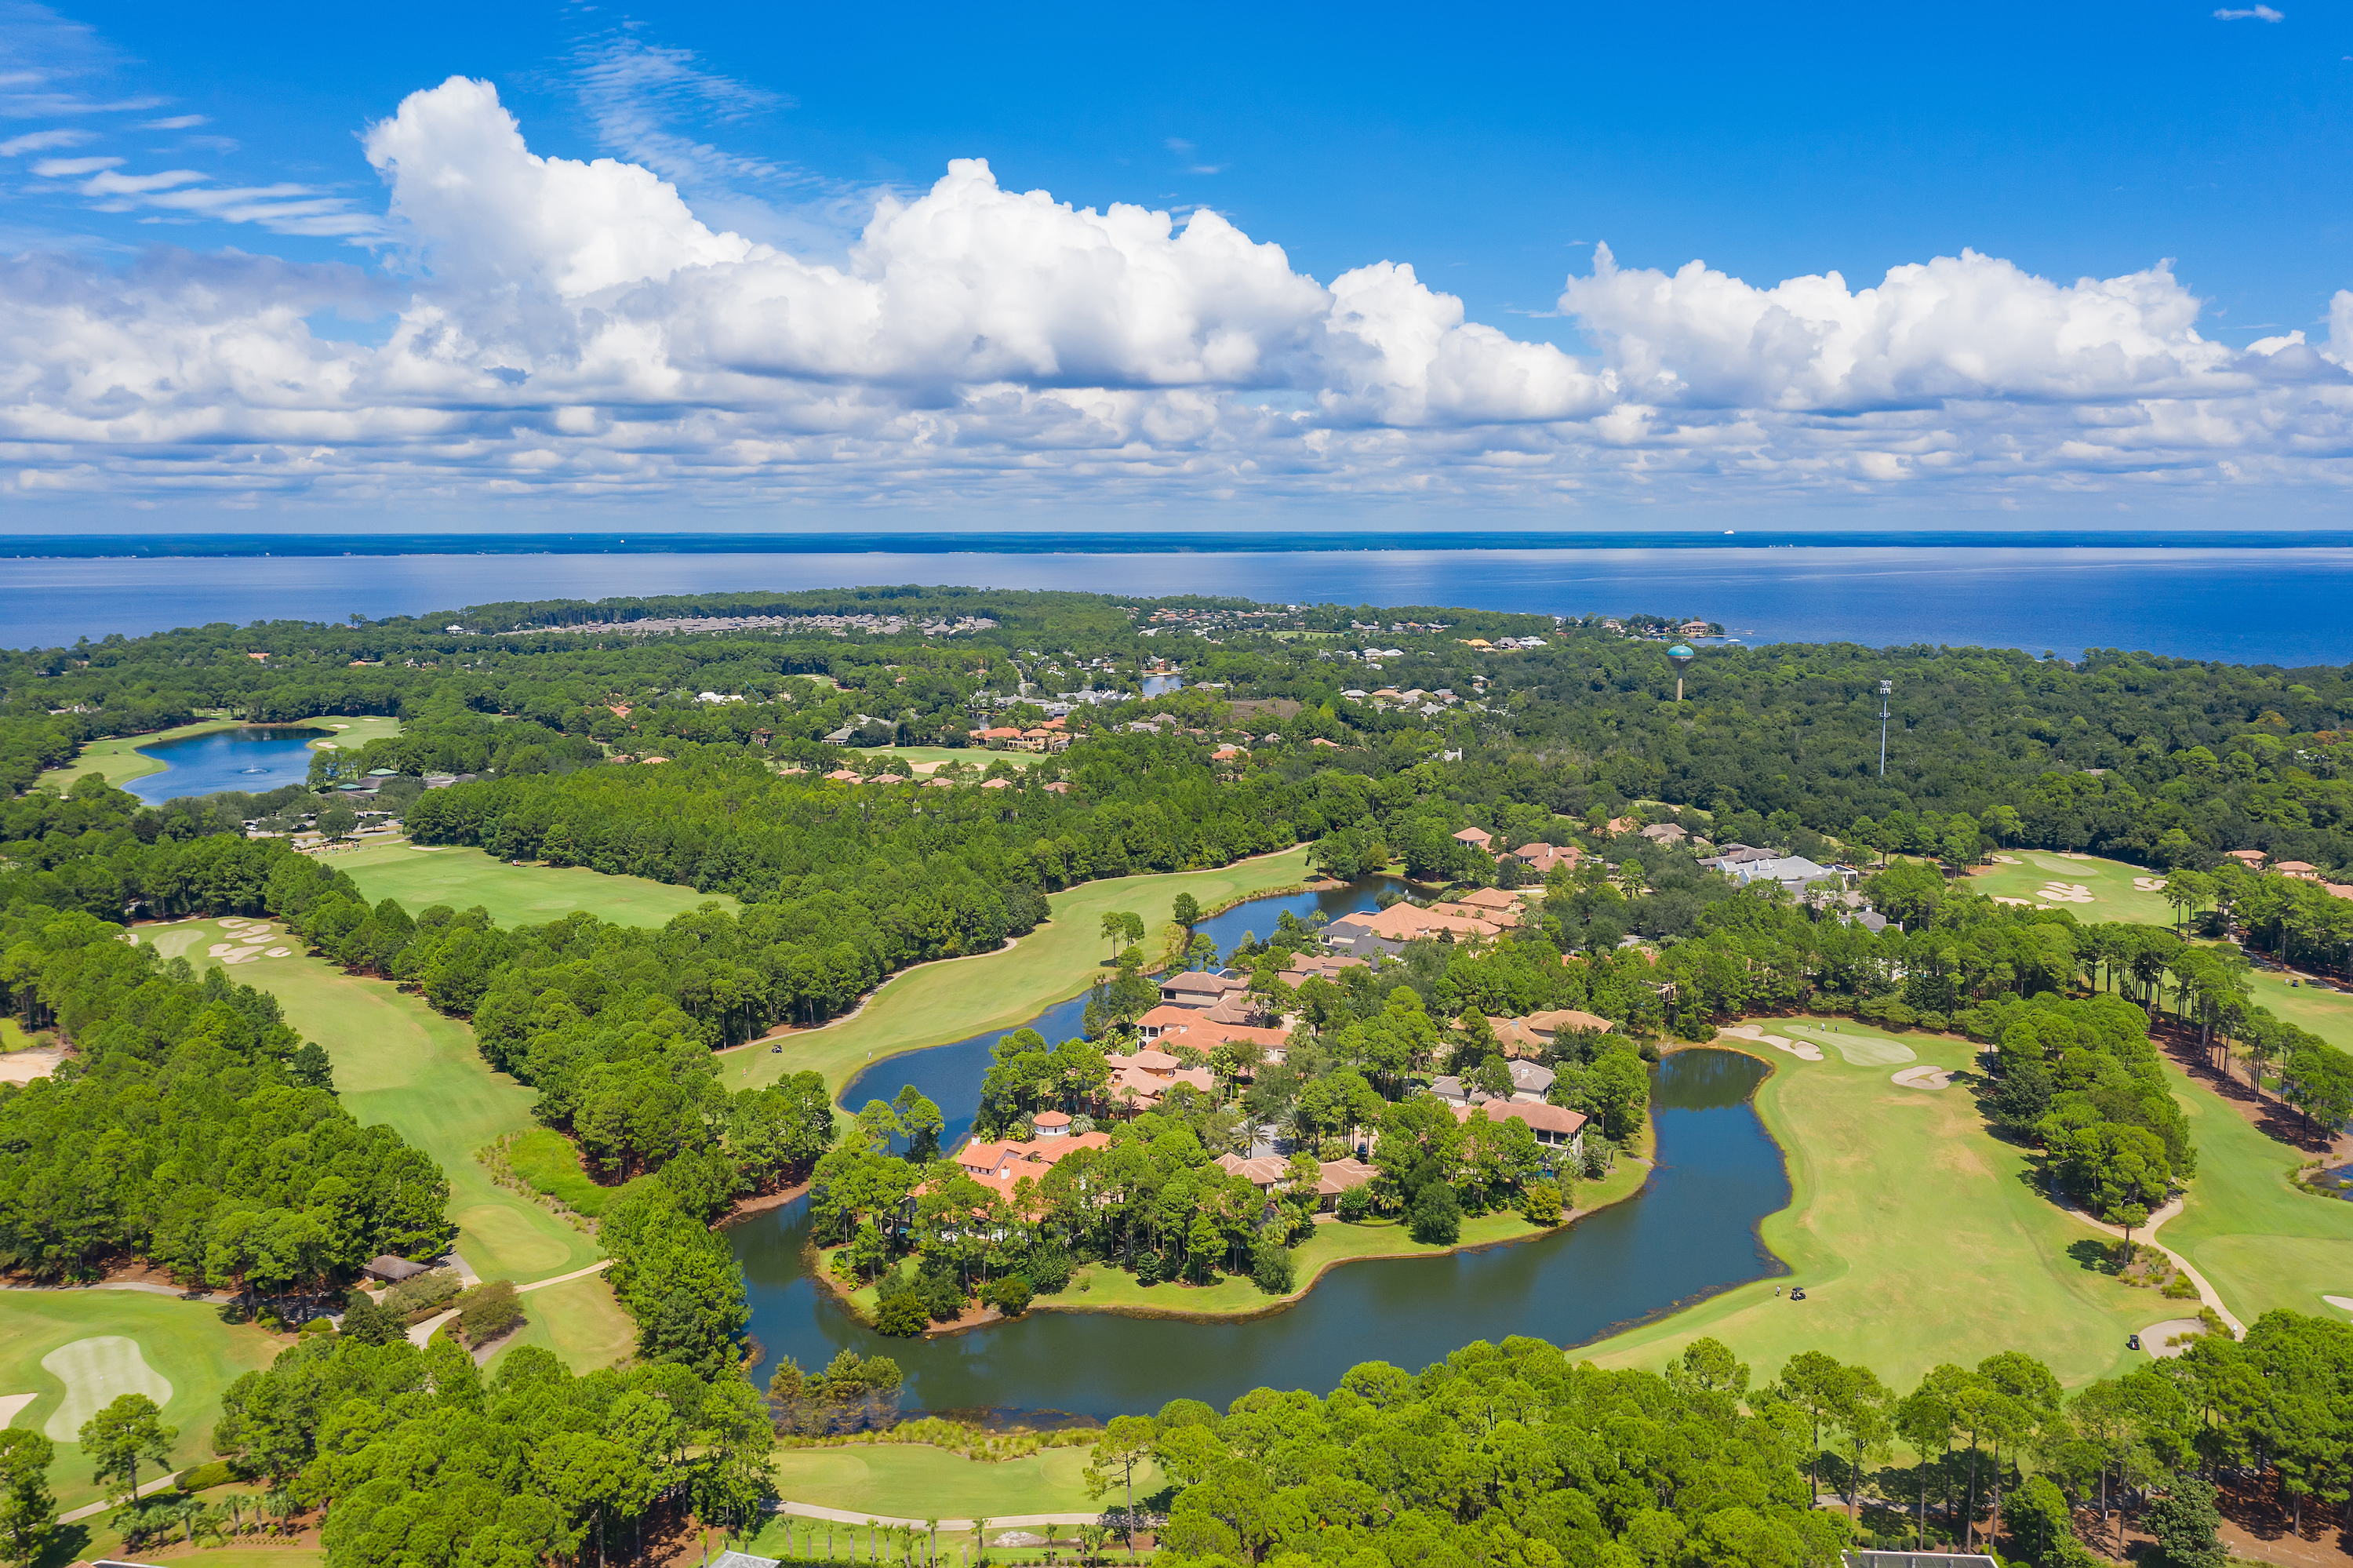 An aerial view of Sandestin homes and golf course with Choctawhatchee Bay in the background on a sunny day